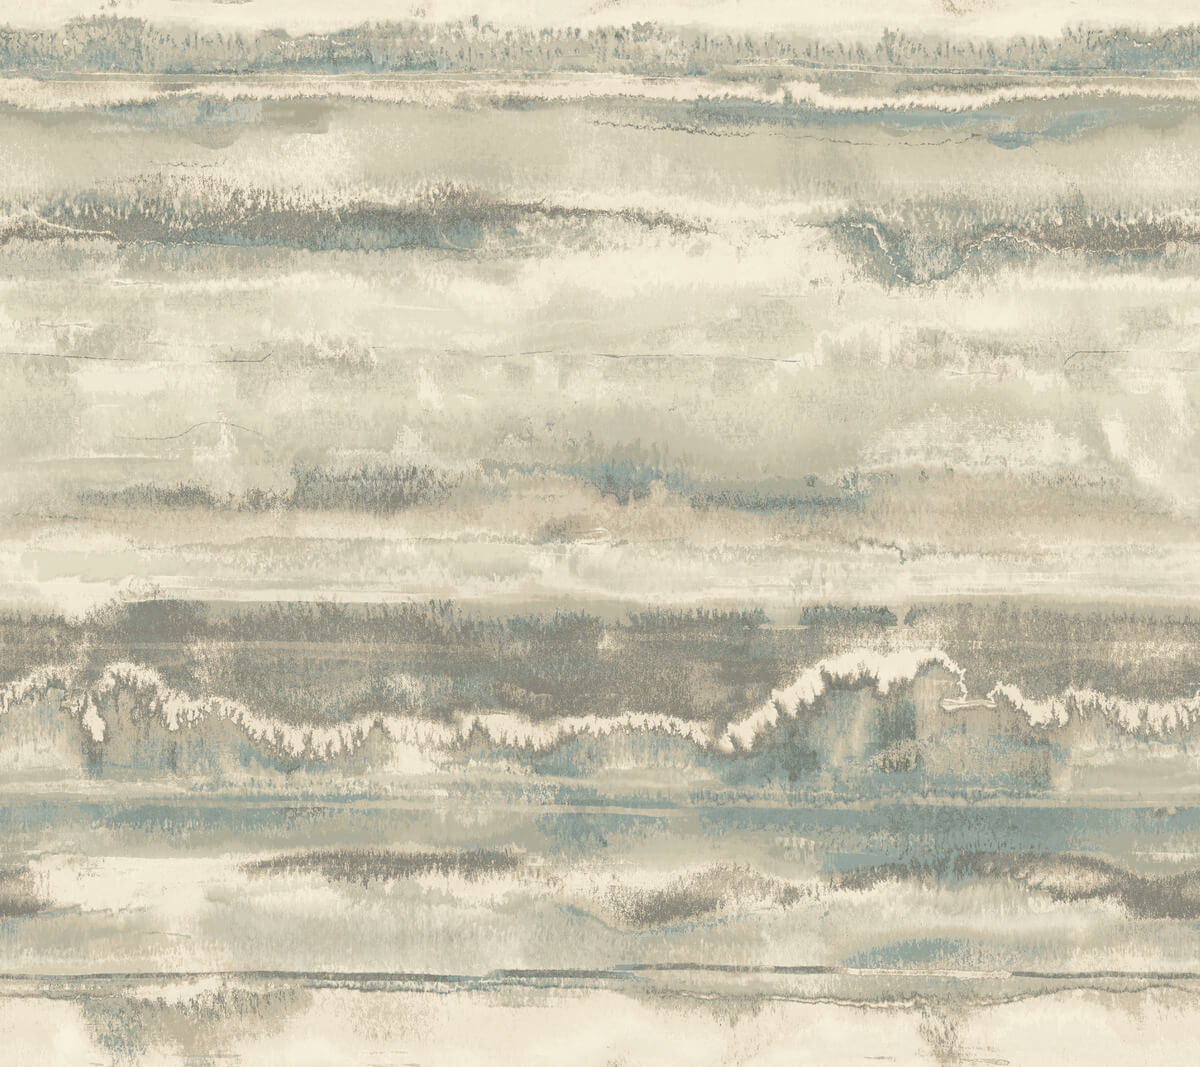 Simply Candice High Tide Peel & Stick Wallpaper - Taupe/Blue